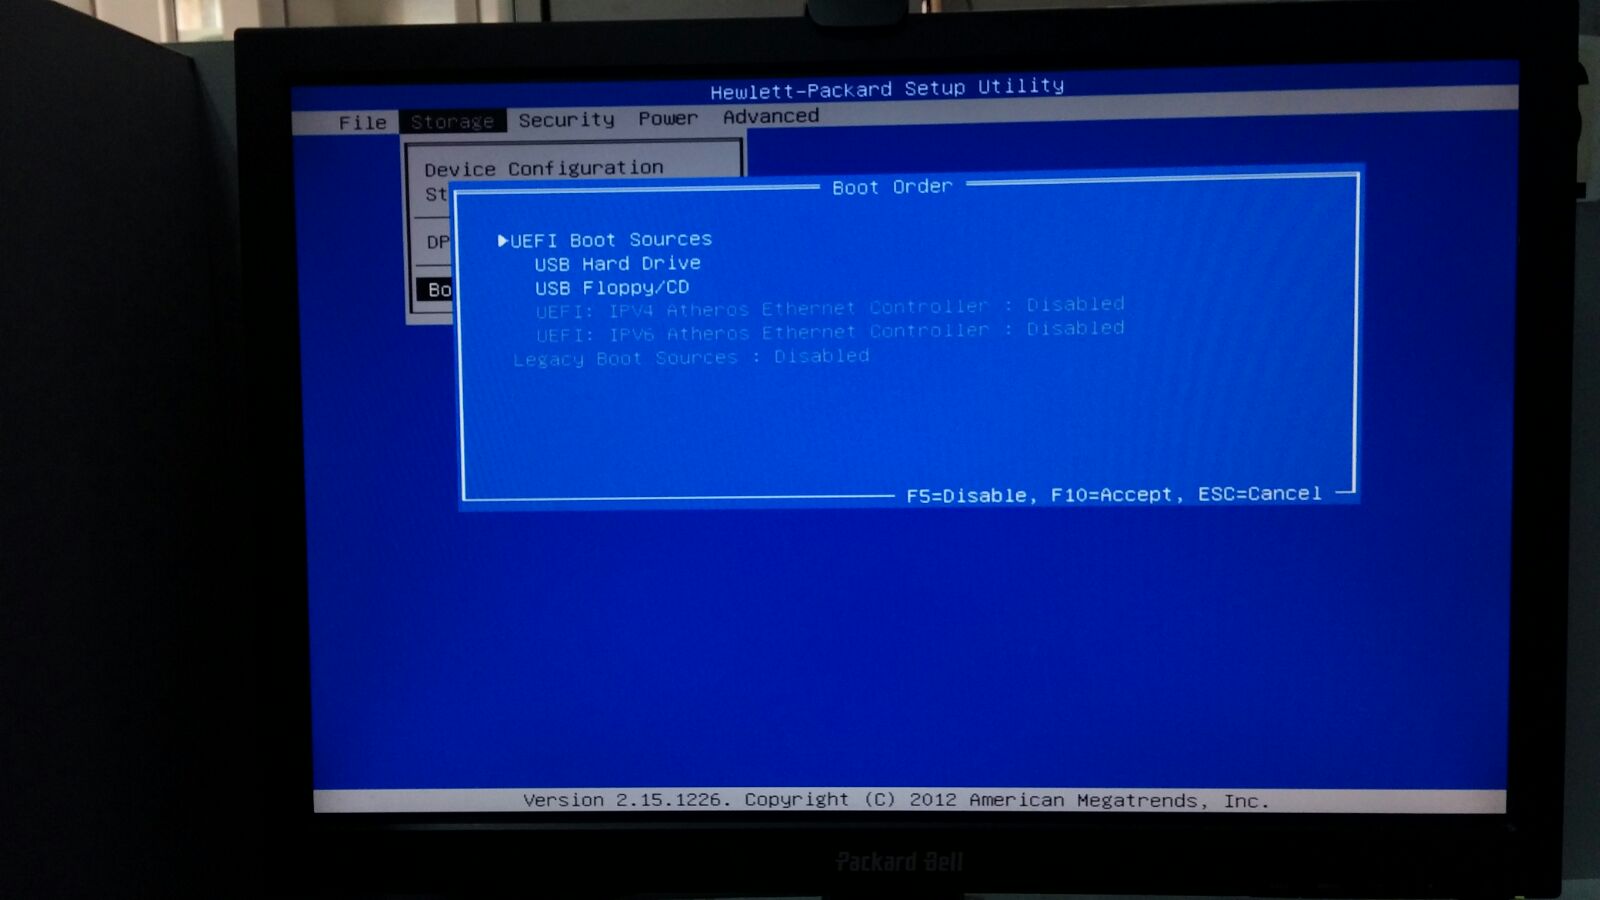 Pxe over ipv4. PXE Boot.